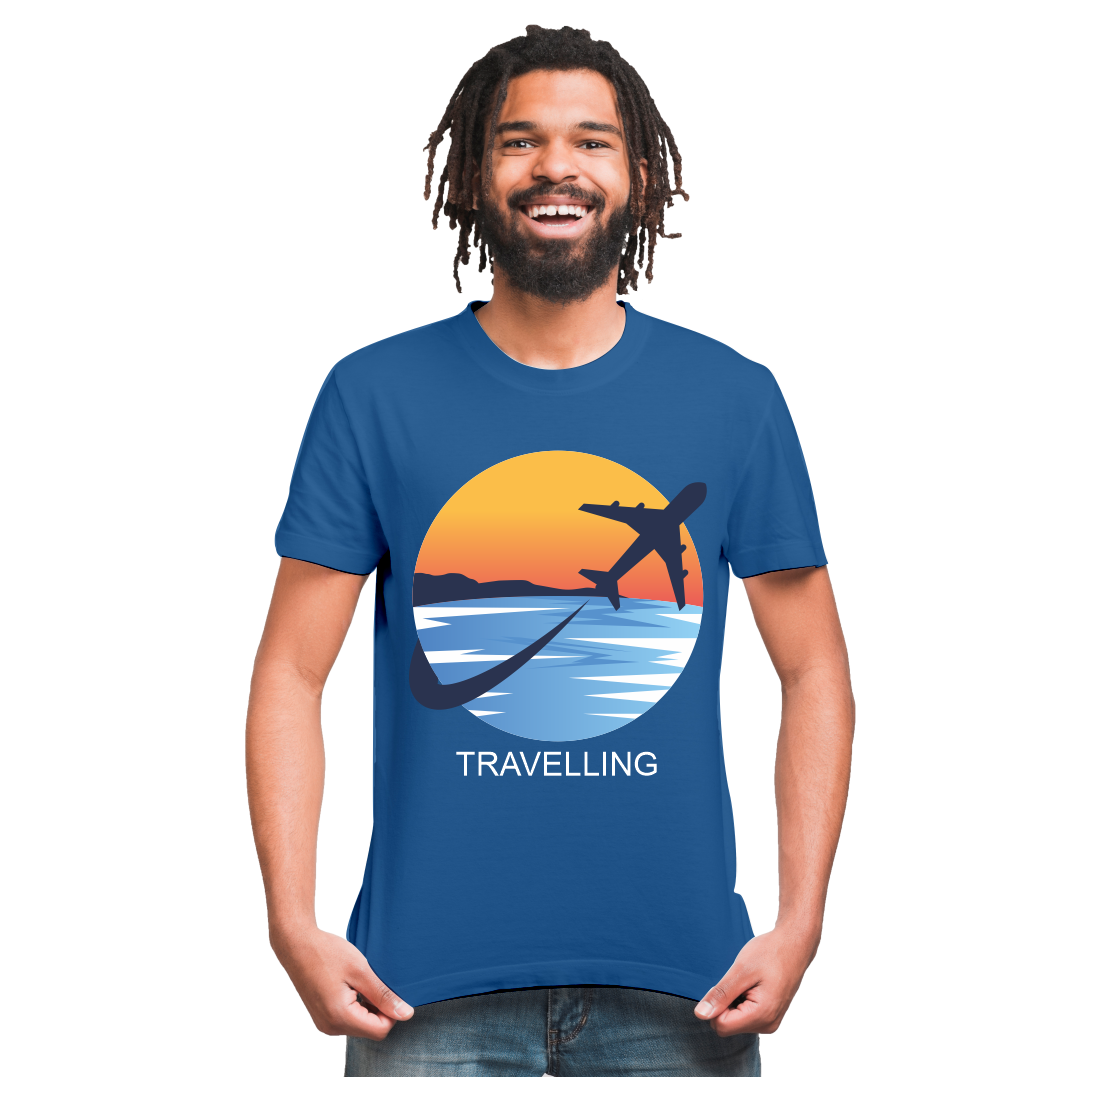 TRAVELLING PRINTED T-SHIRTS